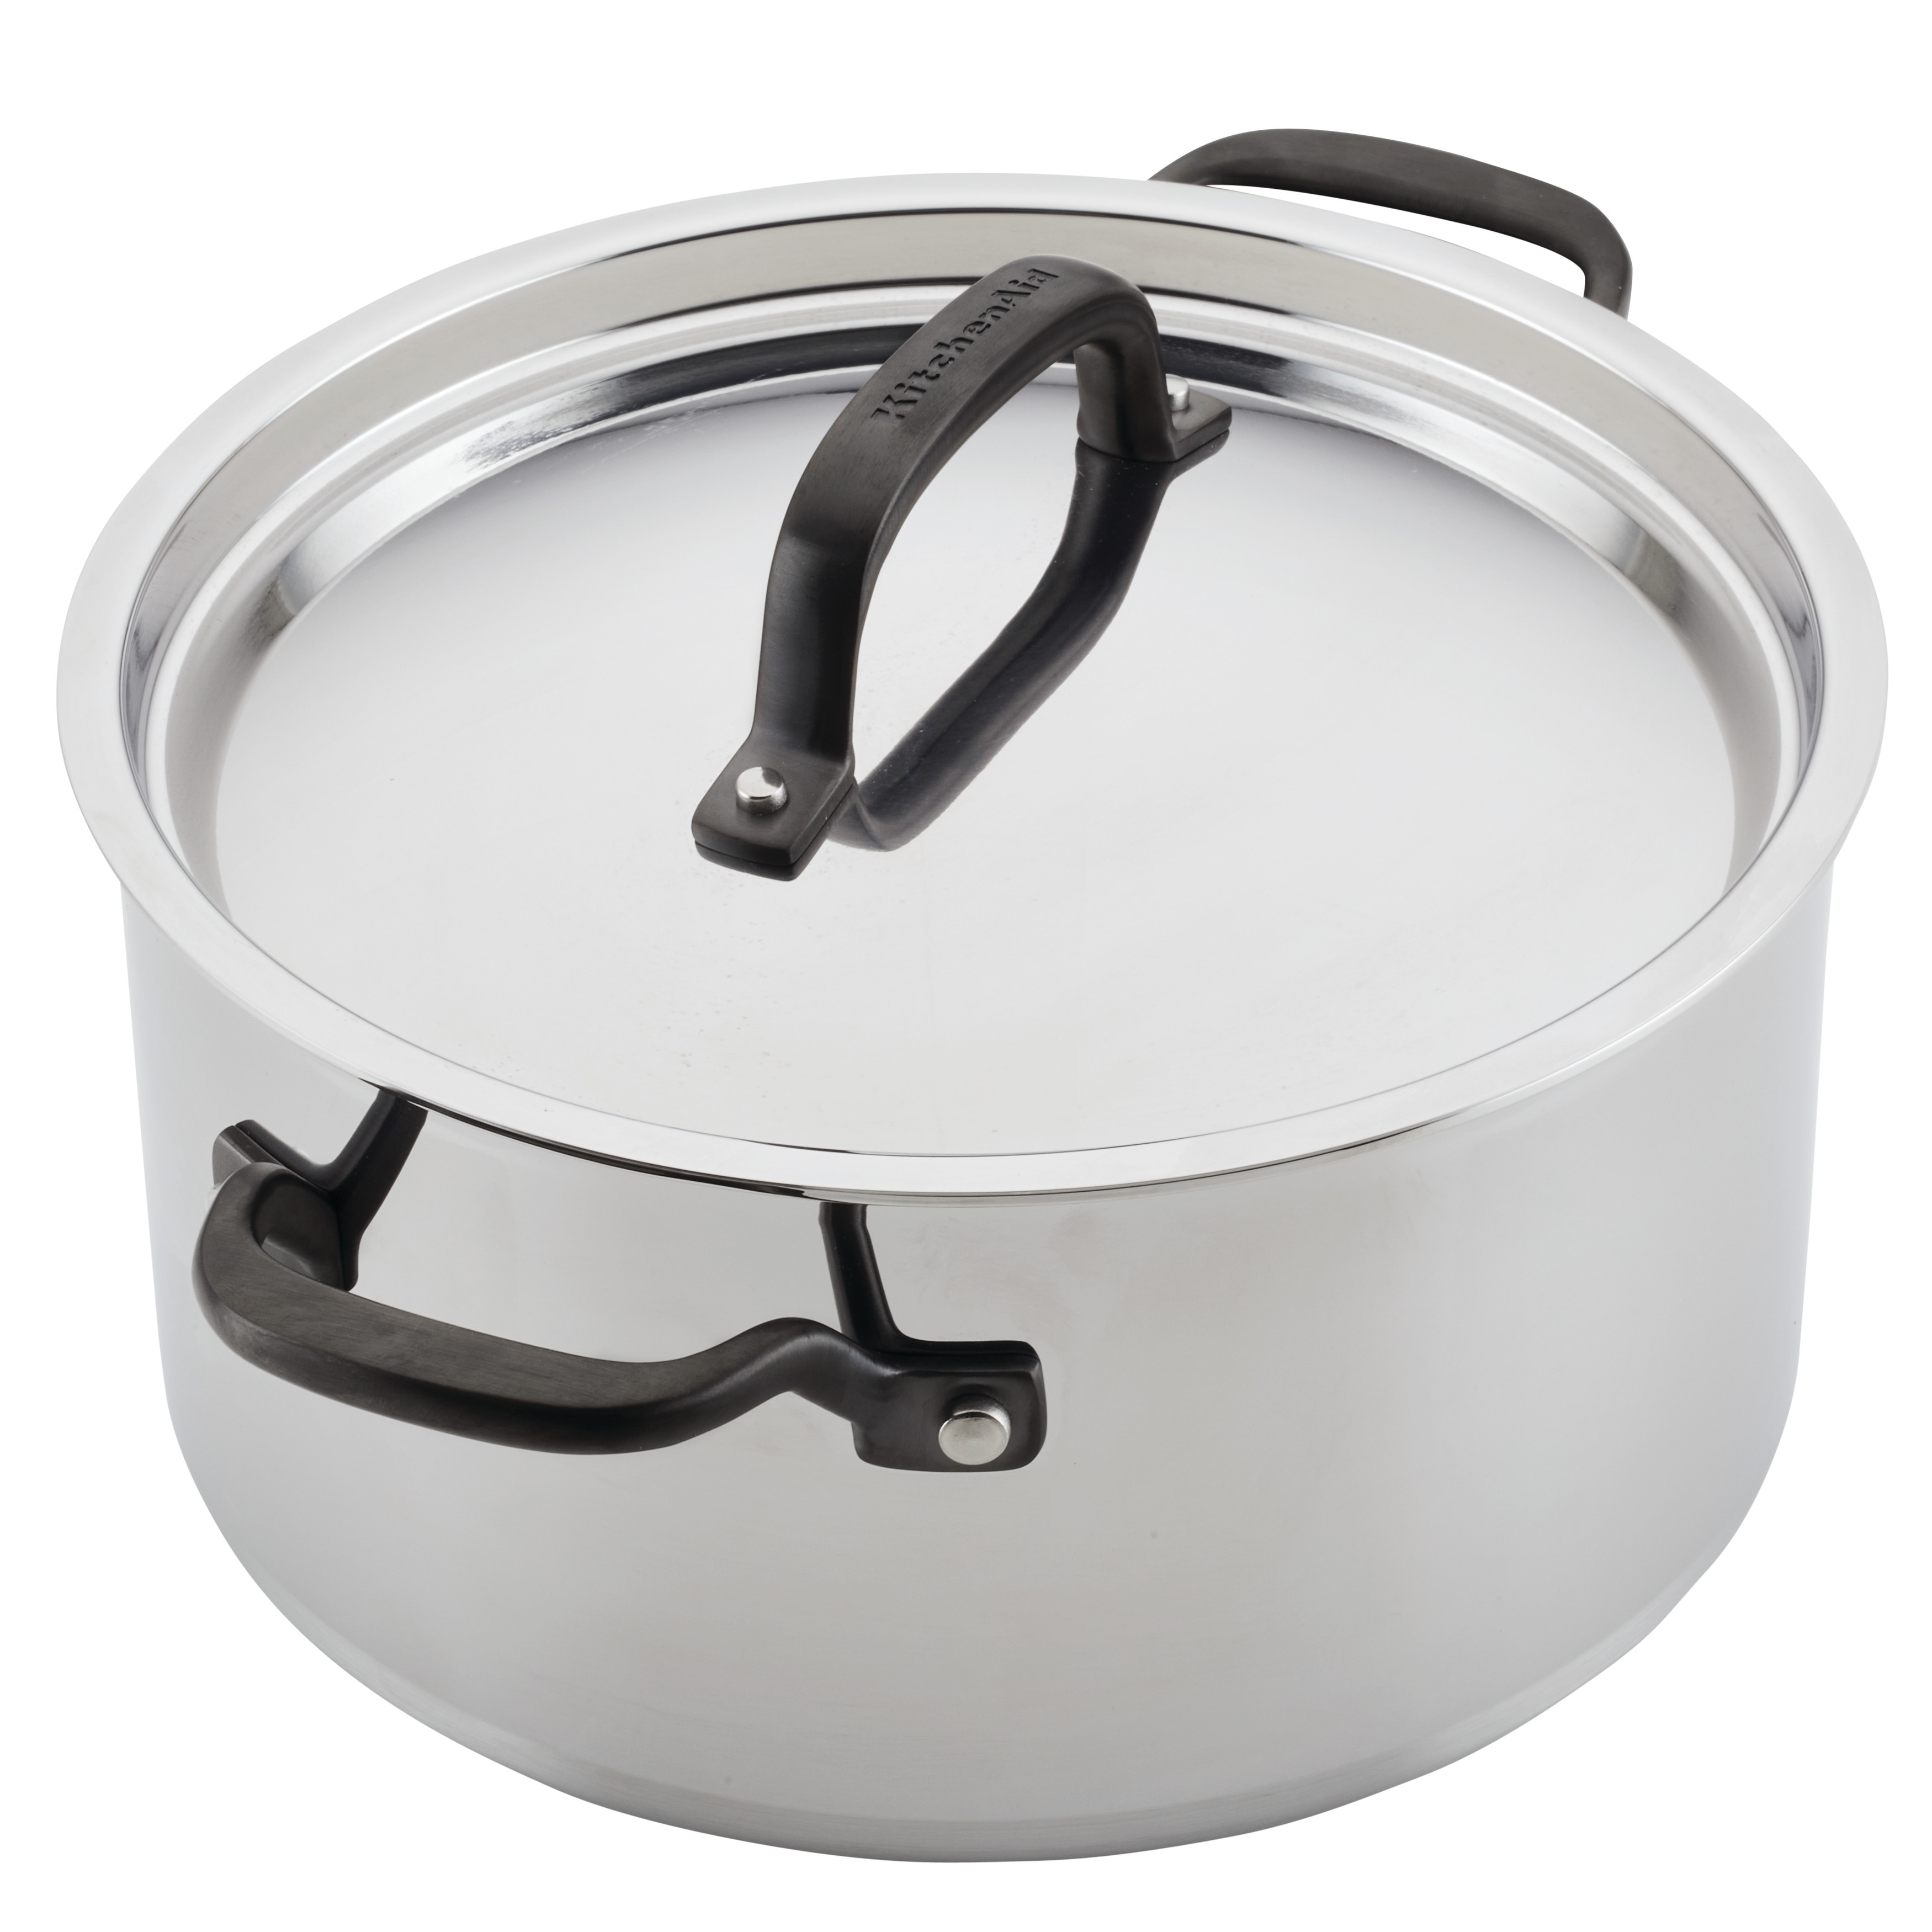 KitchenAid Stainless Steel Casserole with Lid, 4-Quart, Brushed Stainless  Steel